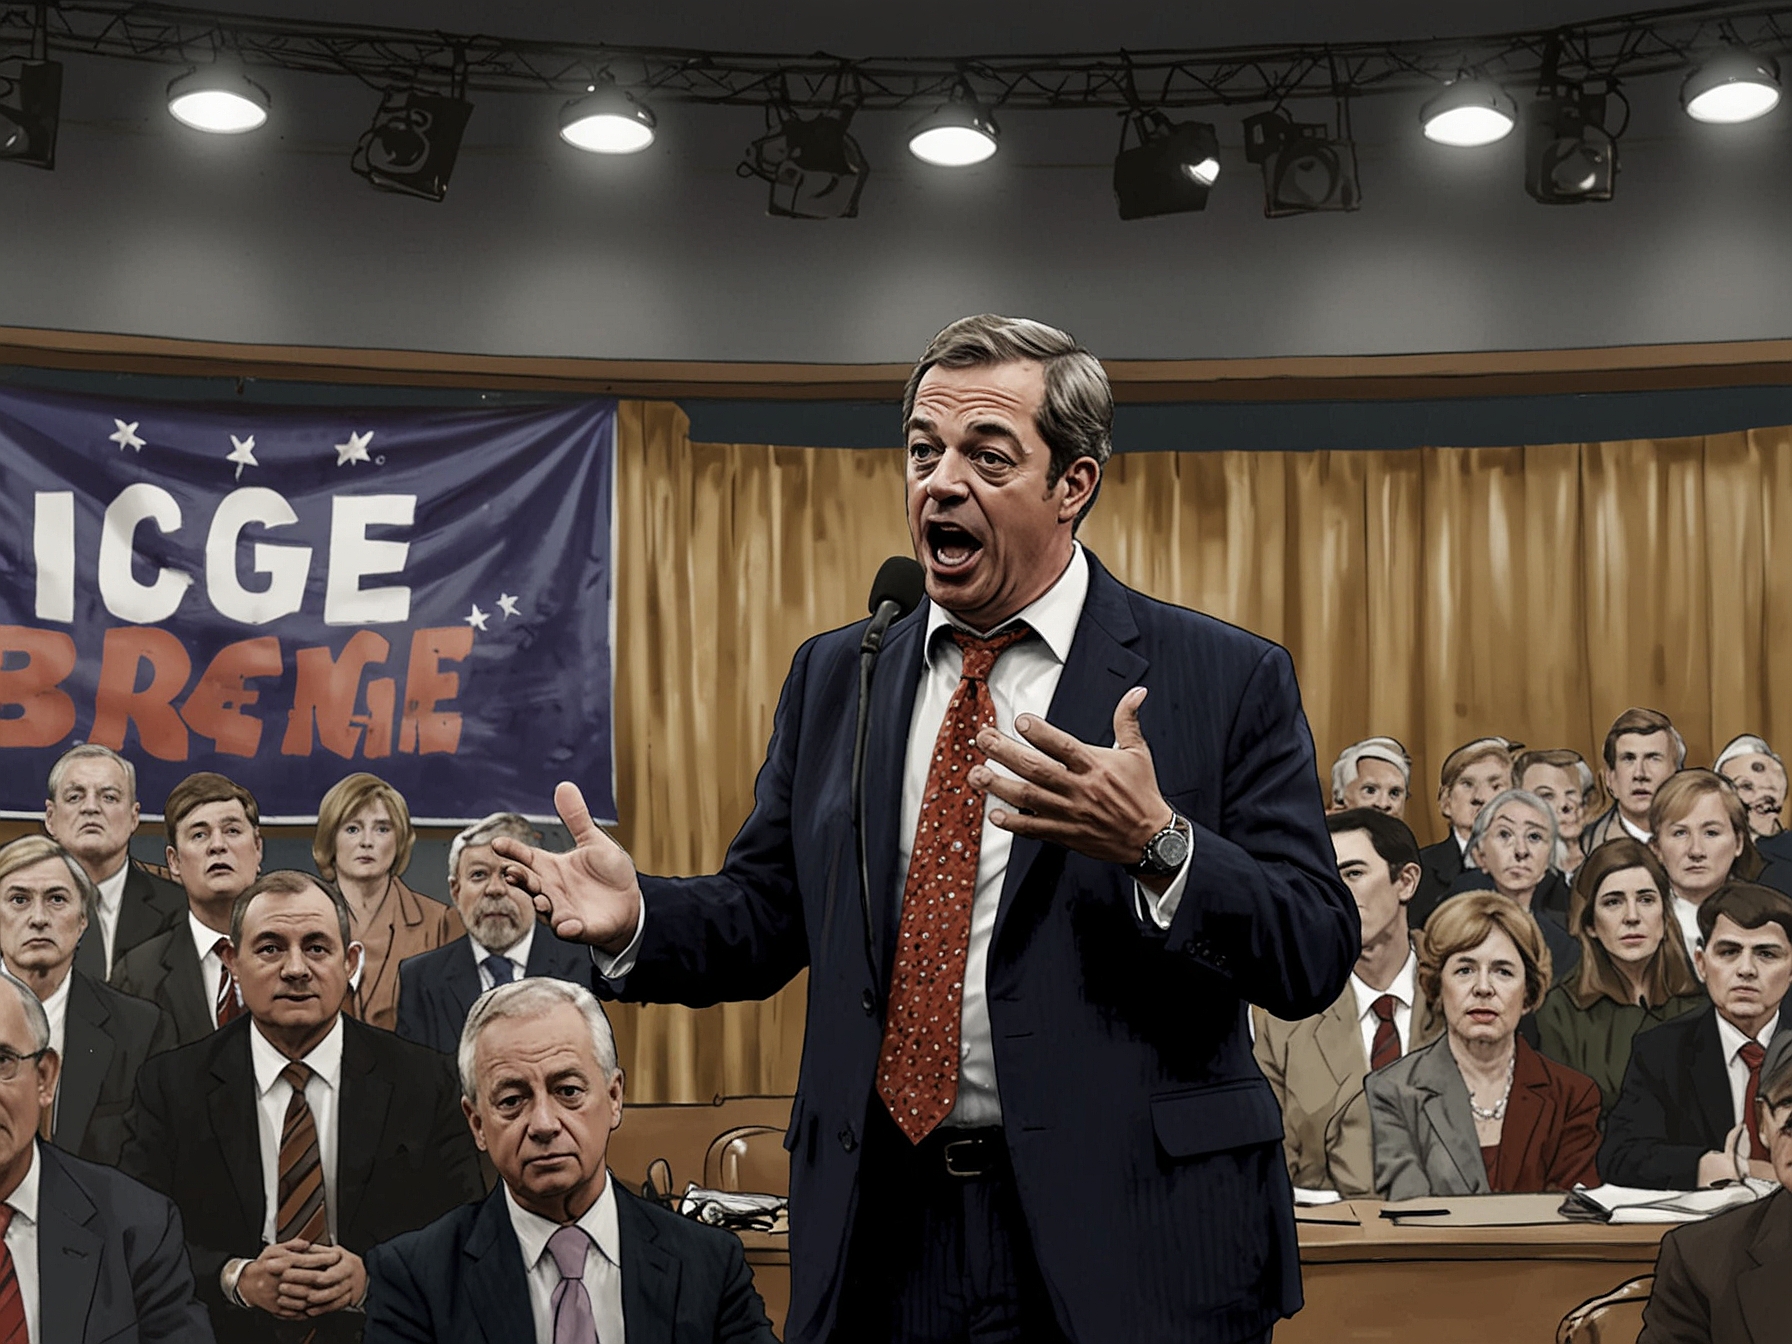 Nigel Farage speaking passionately at a political rally, emphasizing his role in influencing British politics and combating the far-right narrative through structured political discourse.